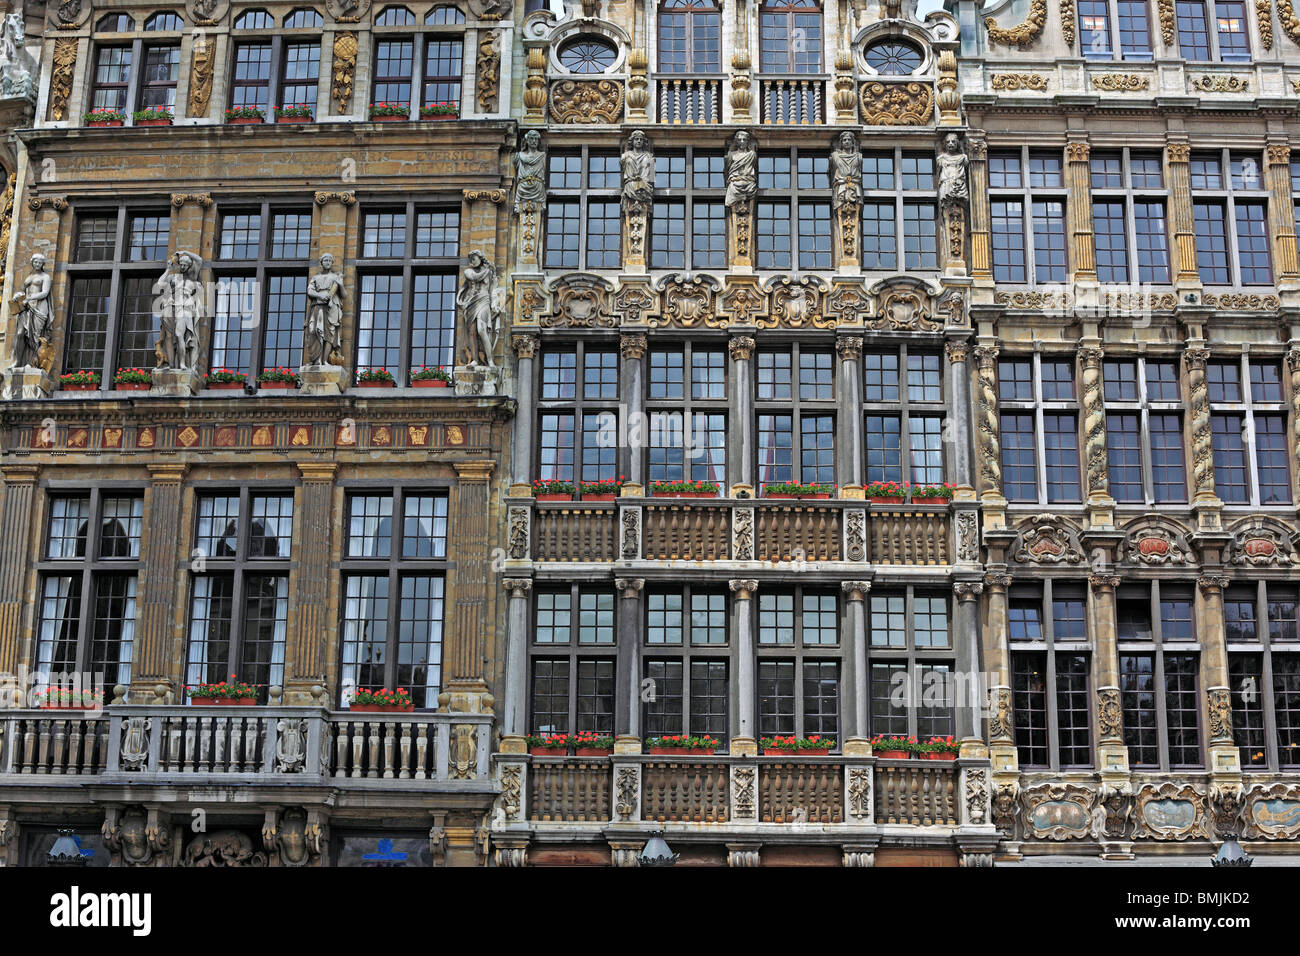 Facades on the Grand Place Main Square, Brussels, Belgium Stock Photo